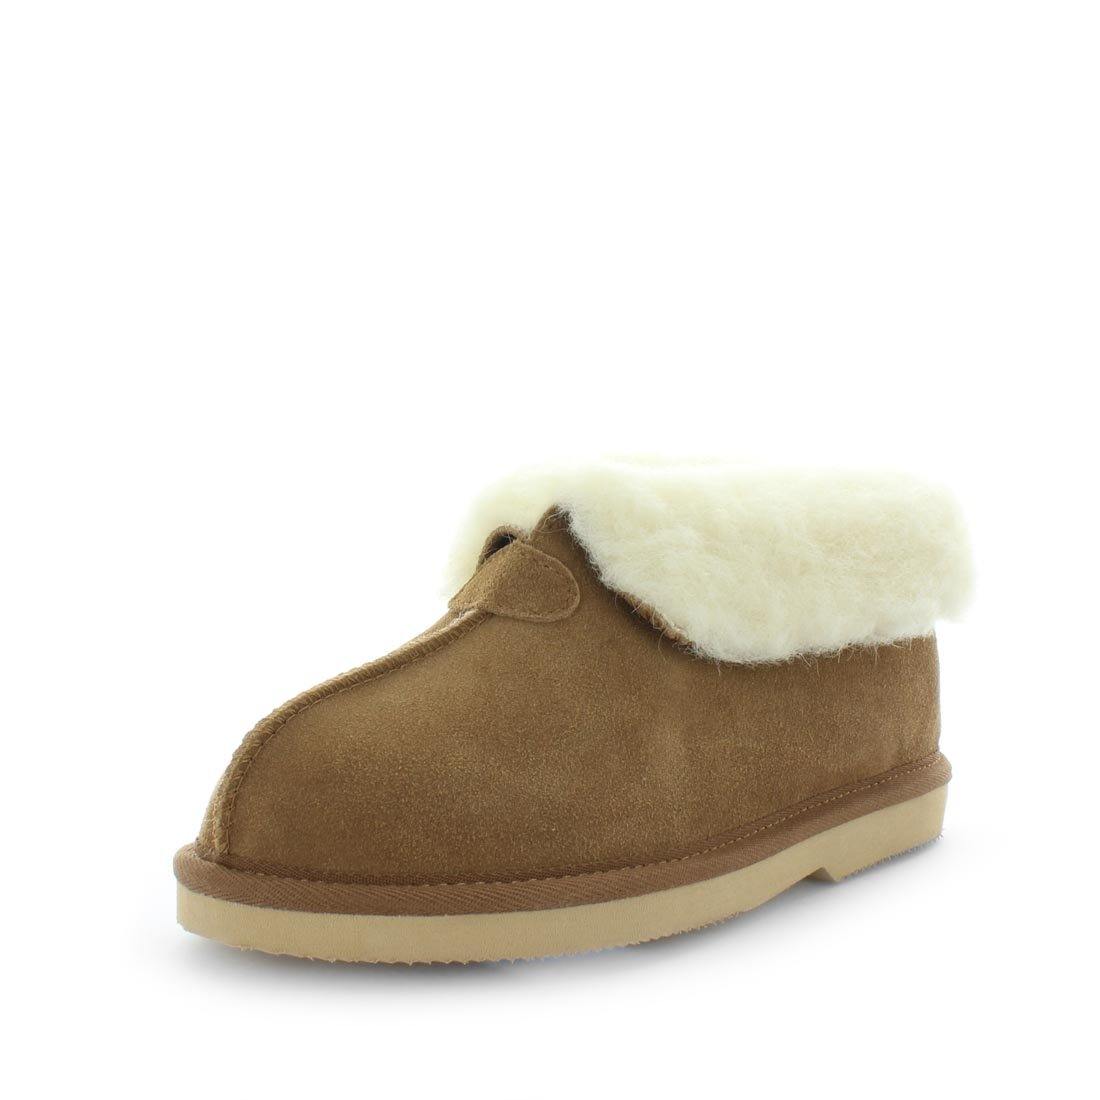 COSA by JUST BEE - iShoes - NEW ARRIVALS, uggs, What's New, What's New: Women's New Arrivals, Women's Shoes: Slippers - FOOTWEAR-FOOTWEAR